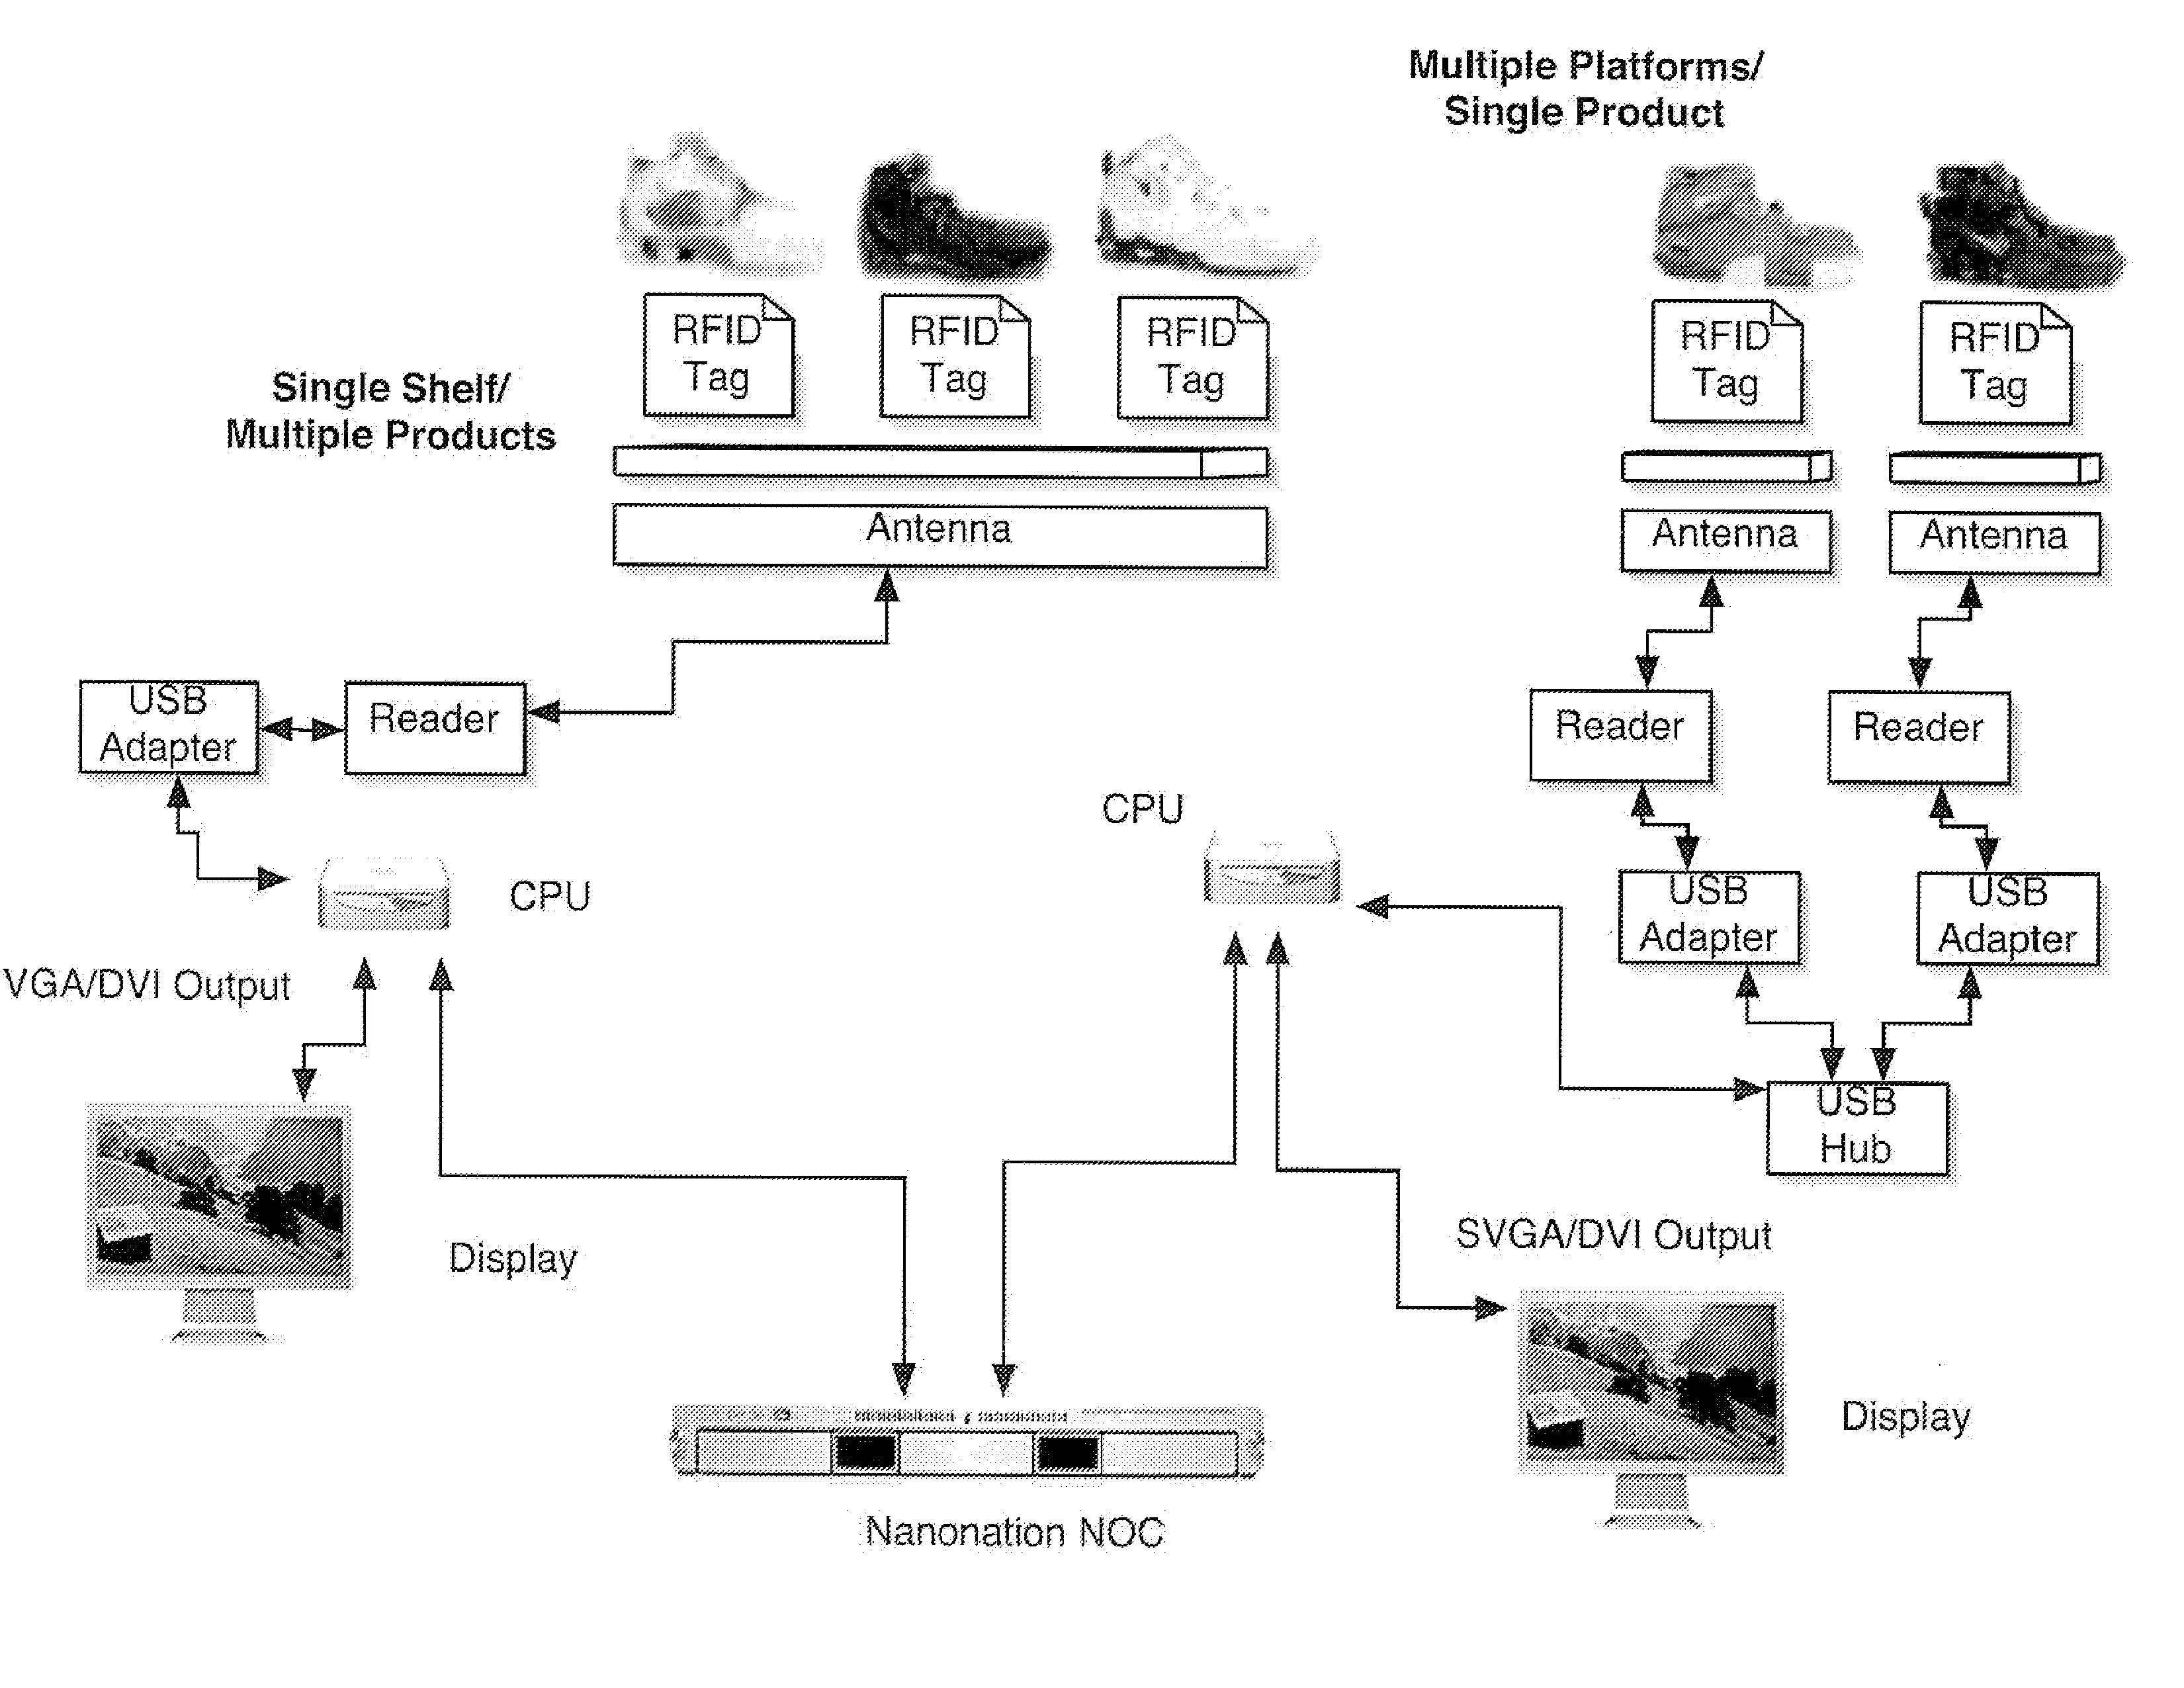 Method and apparatus for RFID initiated interactive retail merchandising